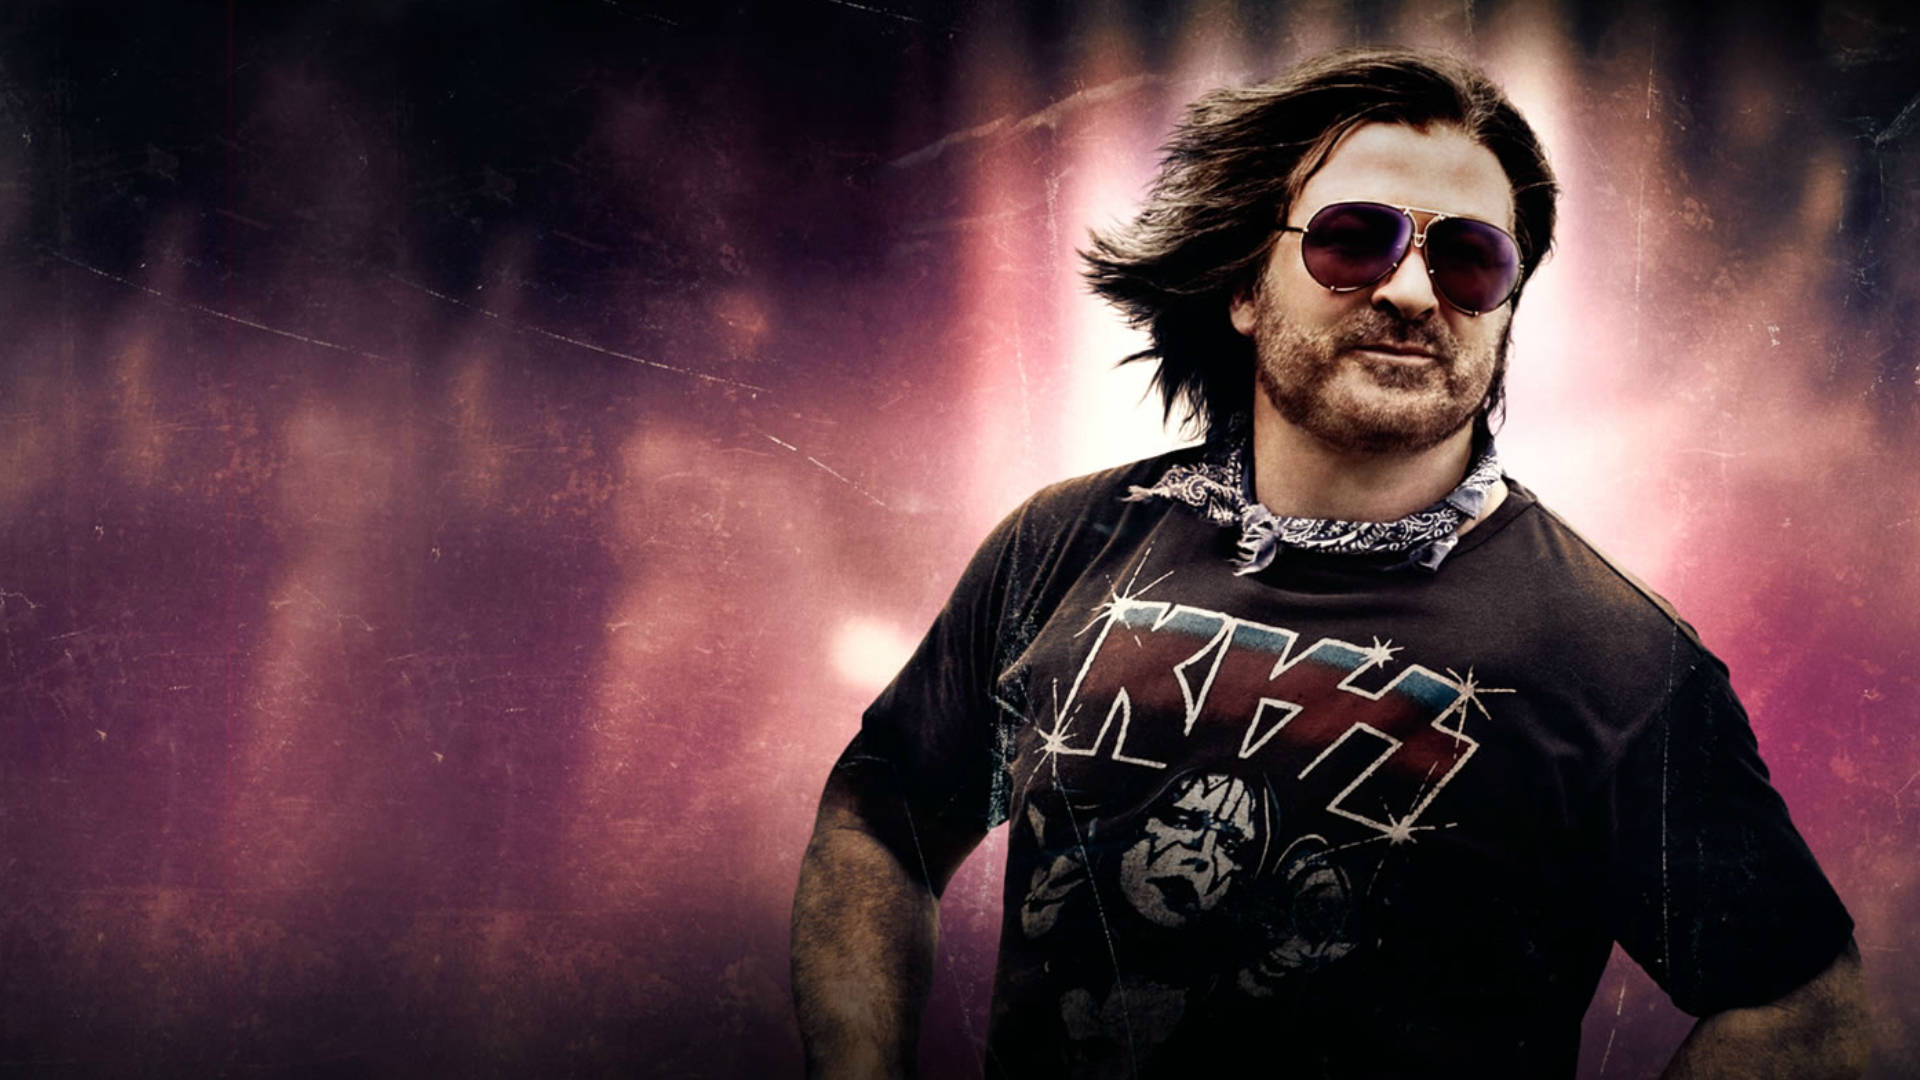 Alec Baldwin Rock Of Ages Background